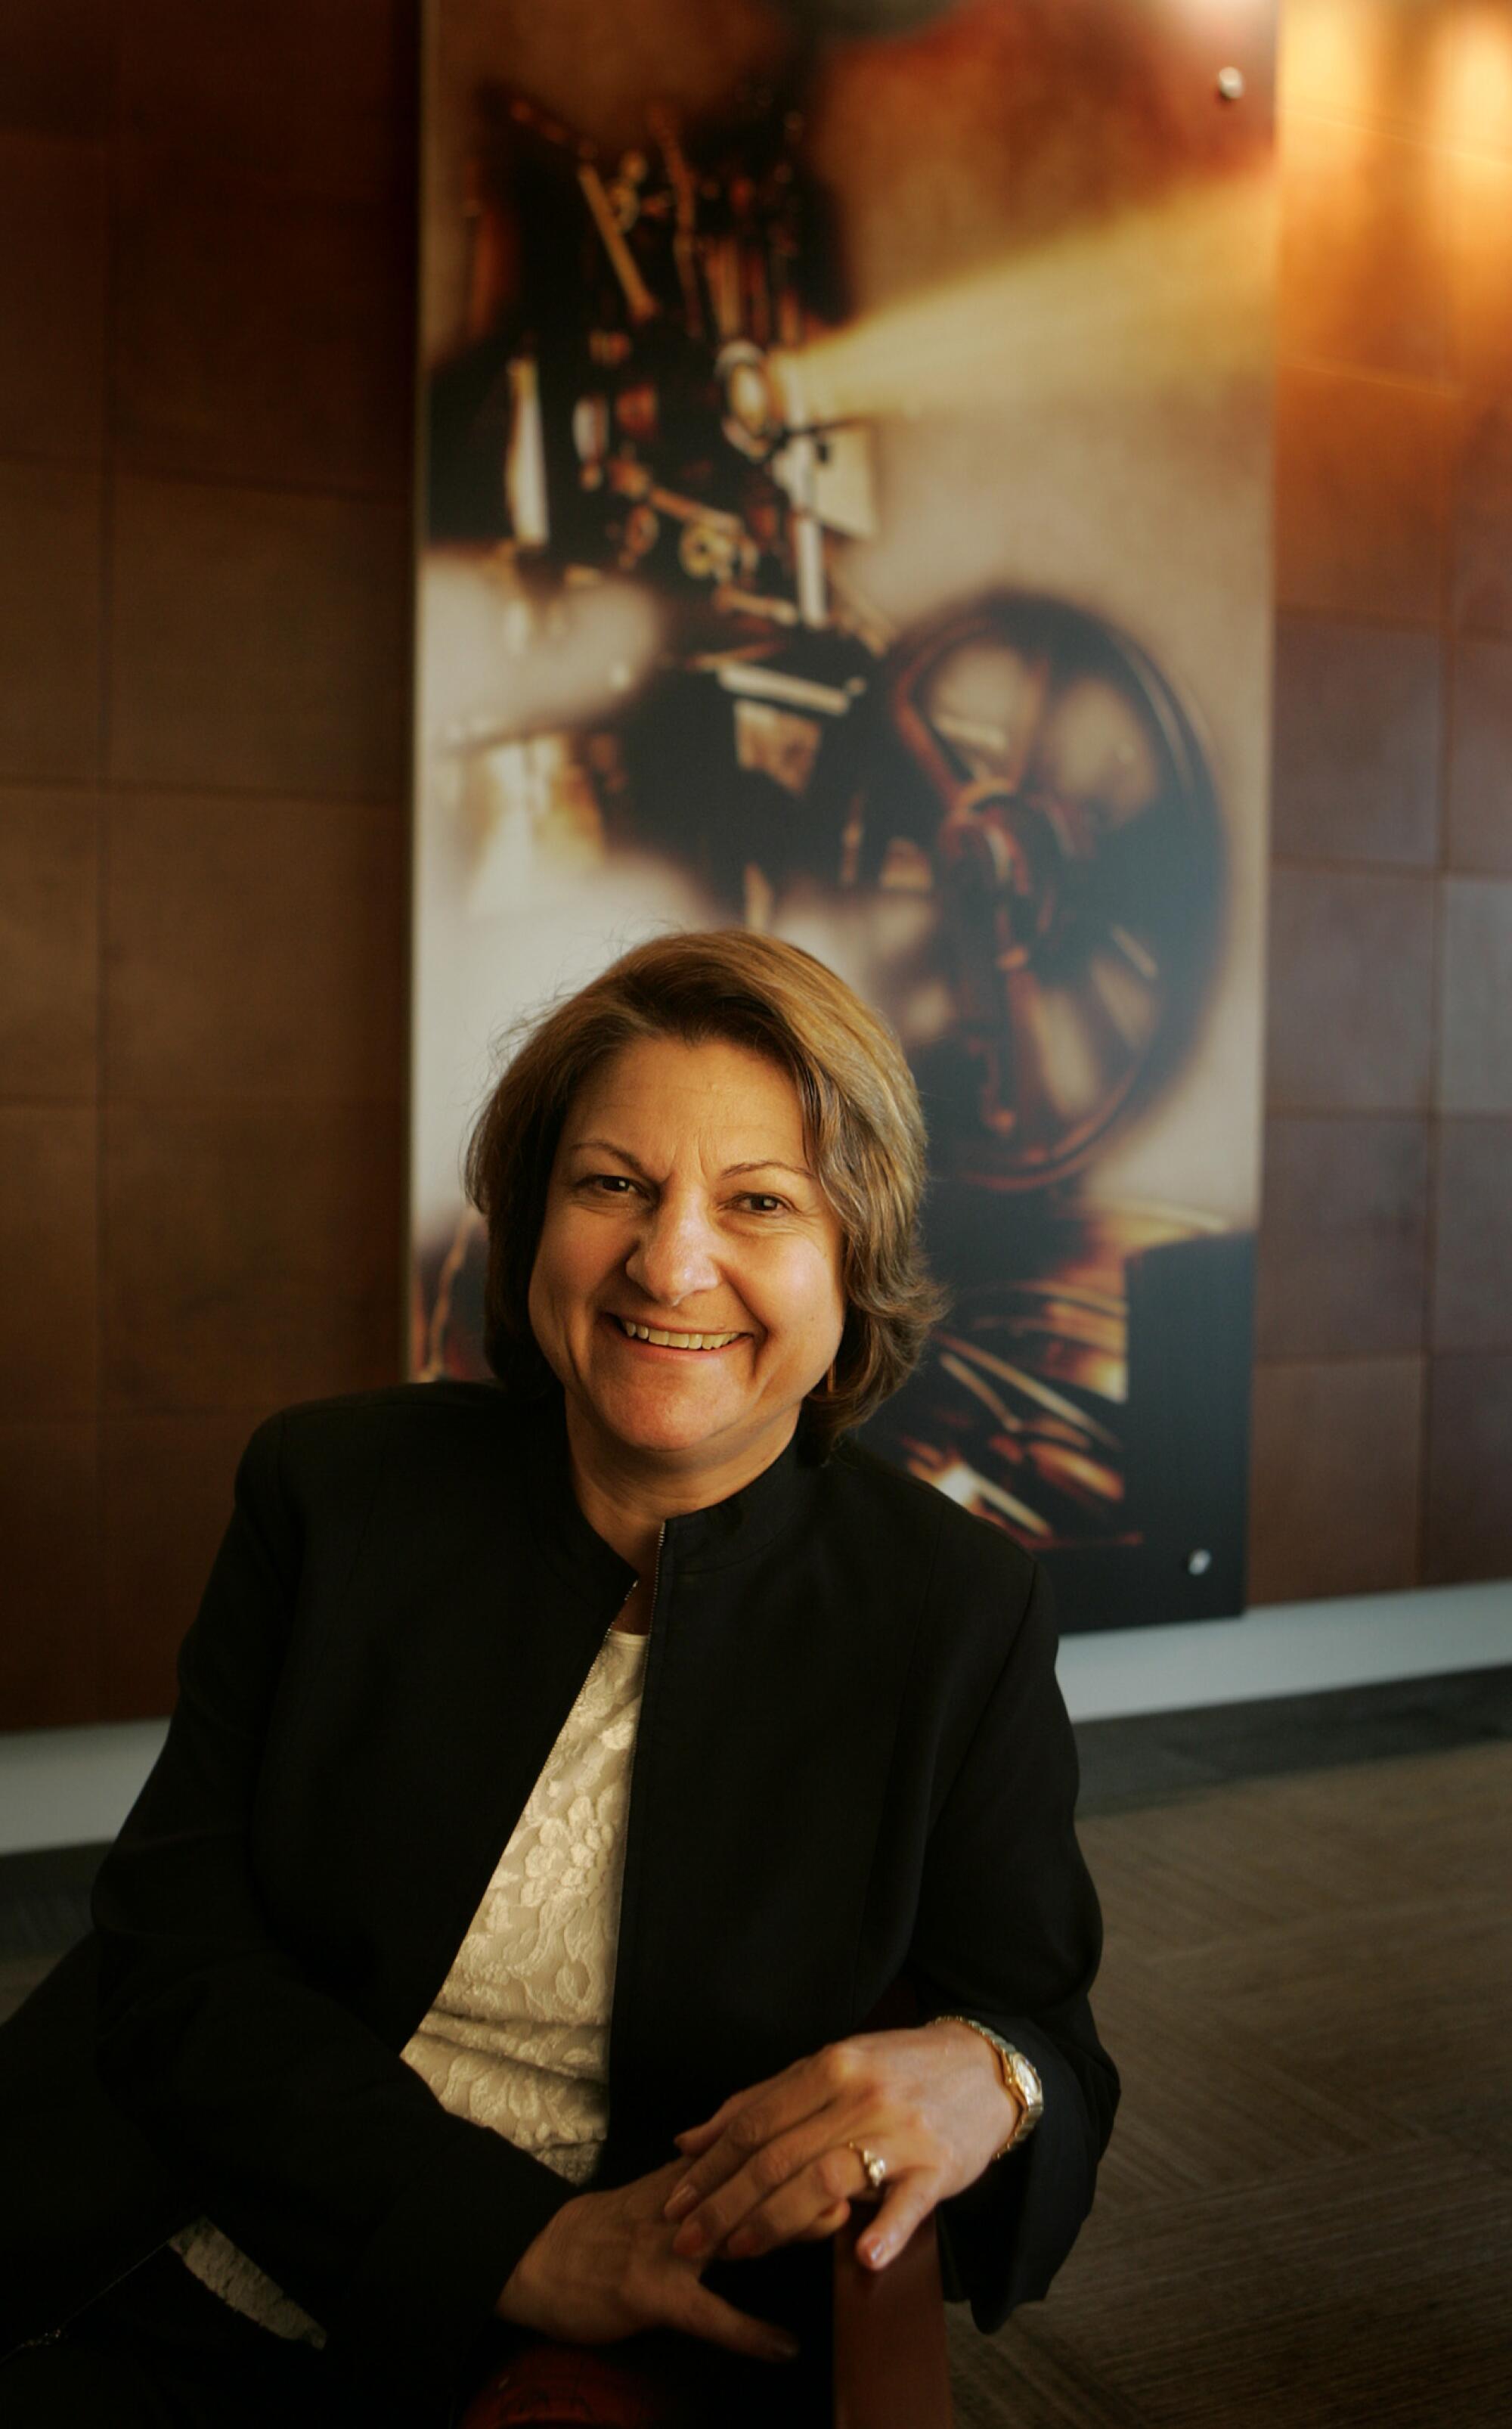 A portrait of Carol Lombardini, president of the Alliance of Motion Picture and Television Producers.